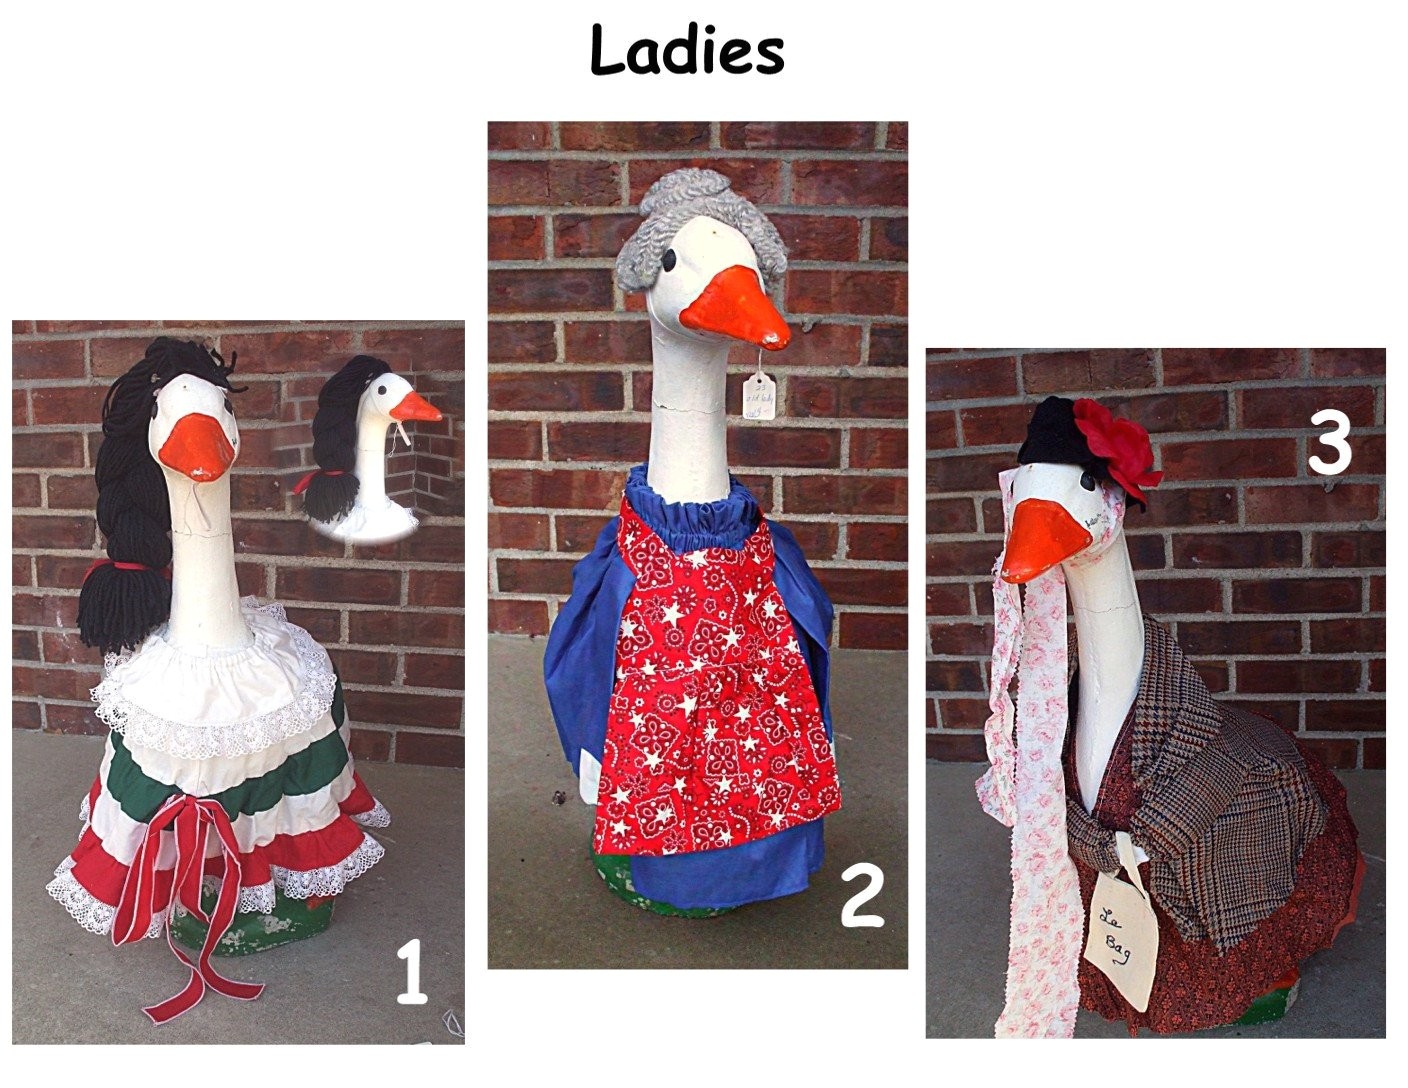 large lawn goose outfits for your lady